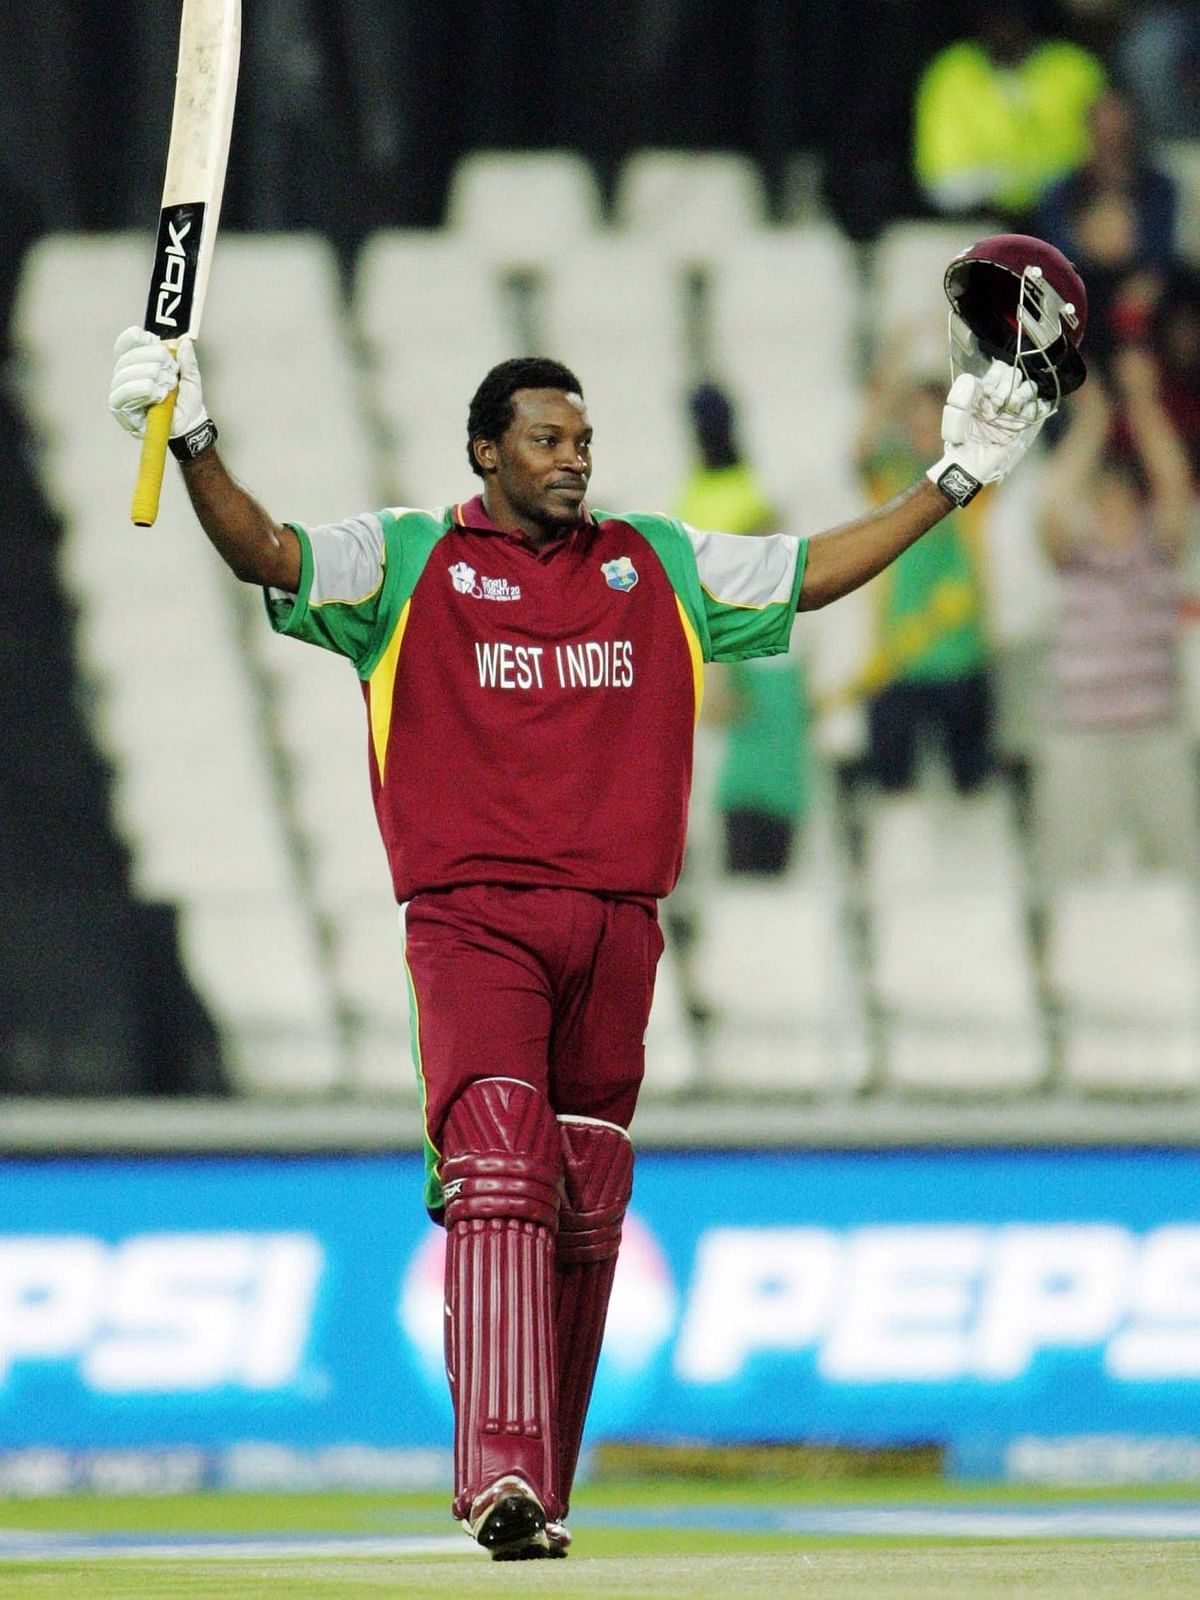 'Universal Boss' Chris Gayle had also smashed another fastest century against South Africa in 2007. It took just 50 deliveries for him to smash a ton in the opening match of the ICC T20 World Cup 2007 in Johannesburg.